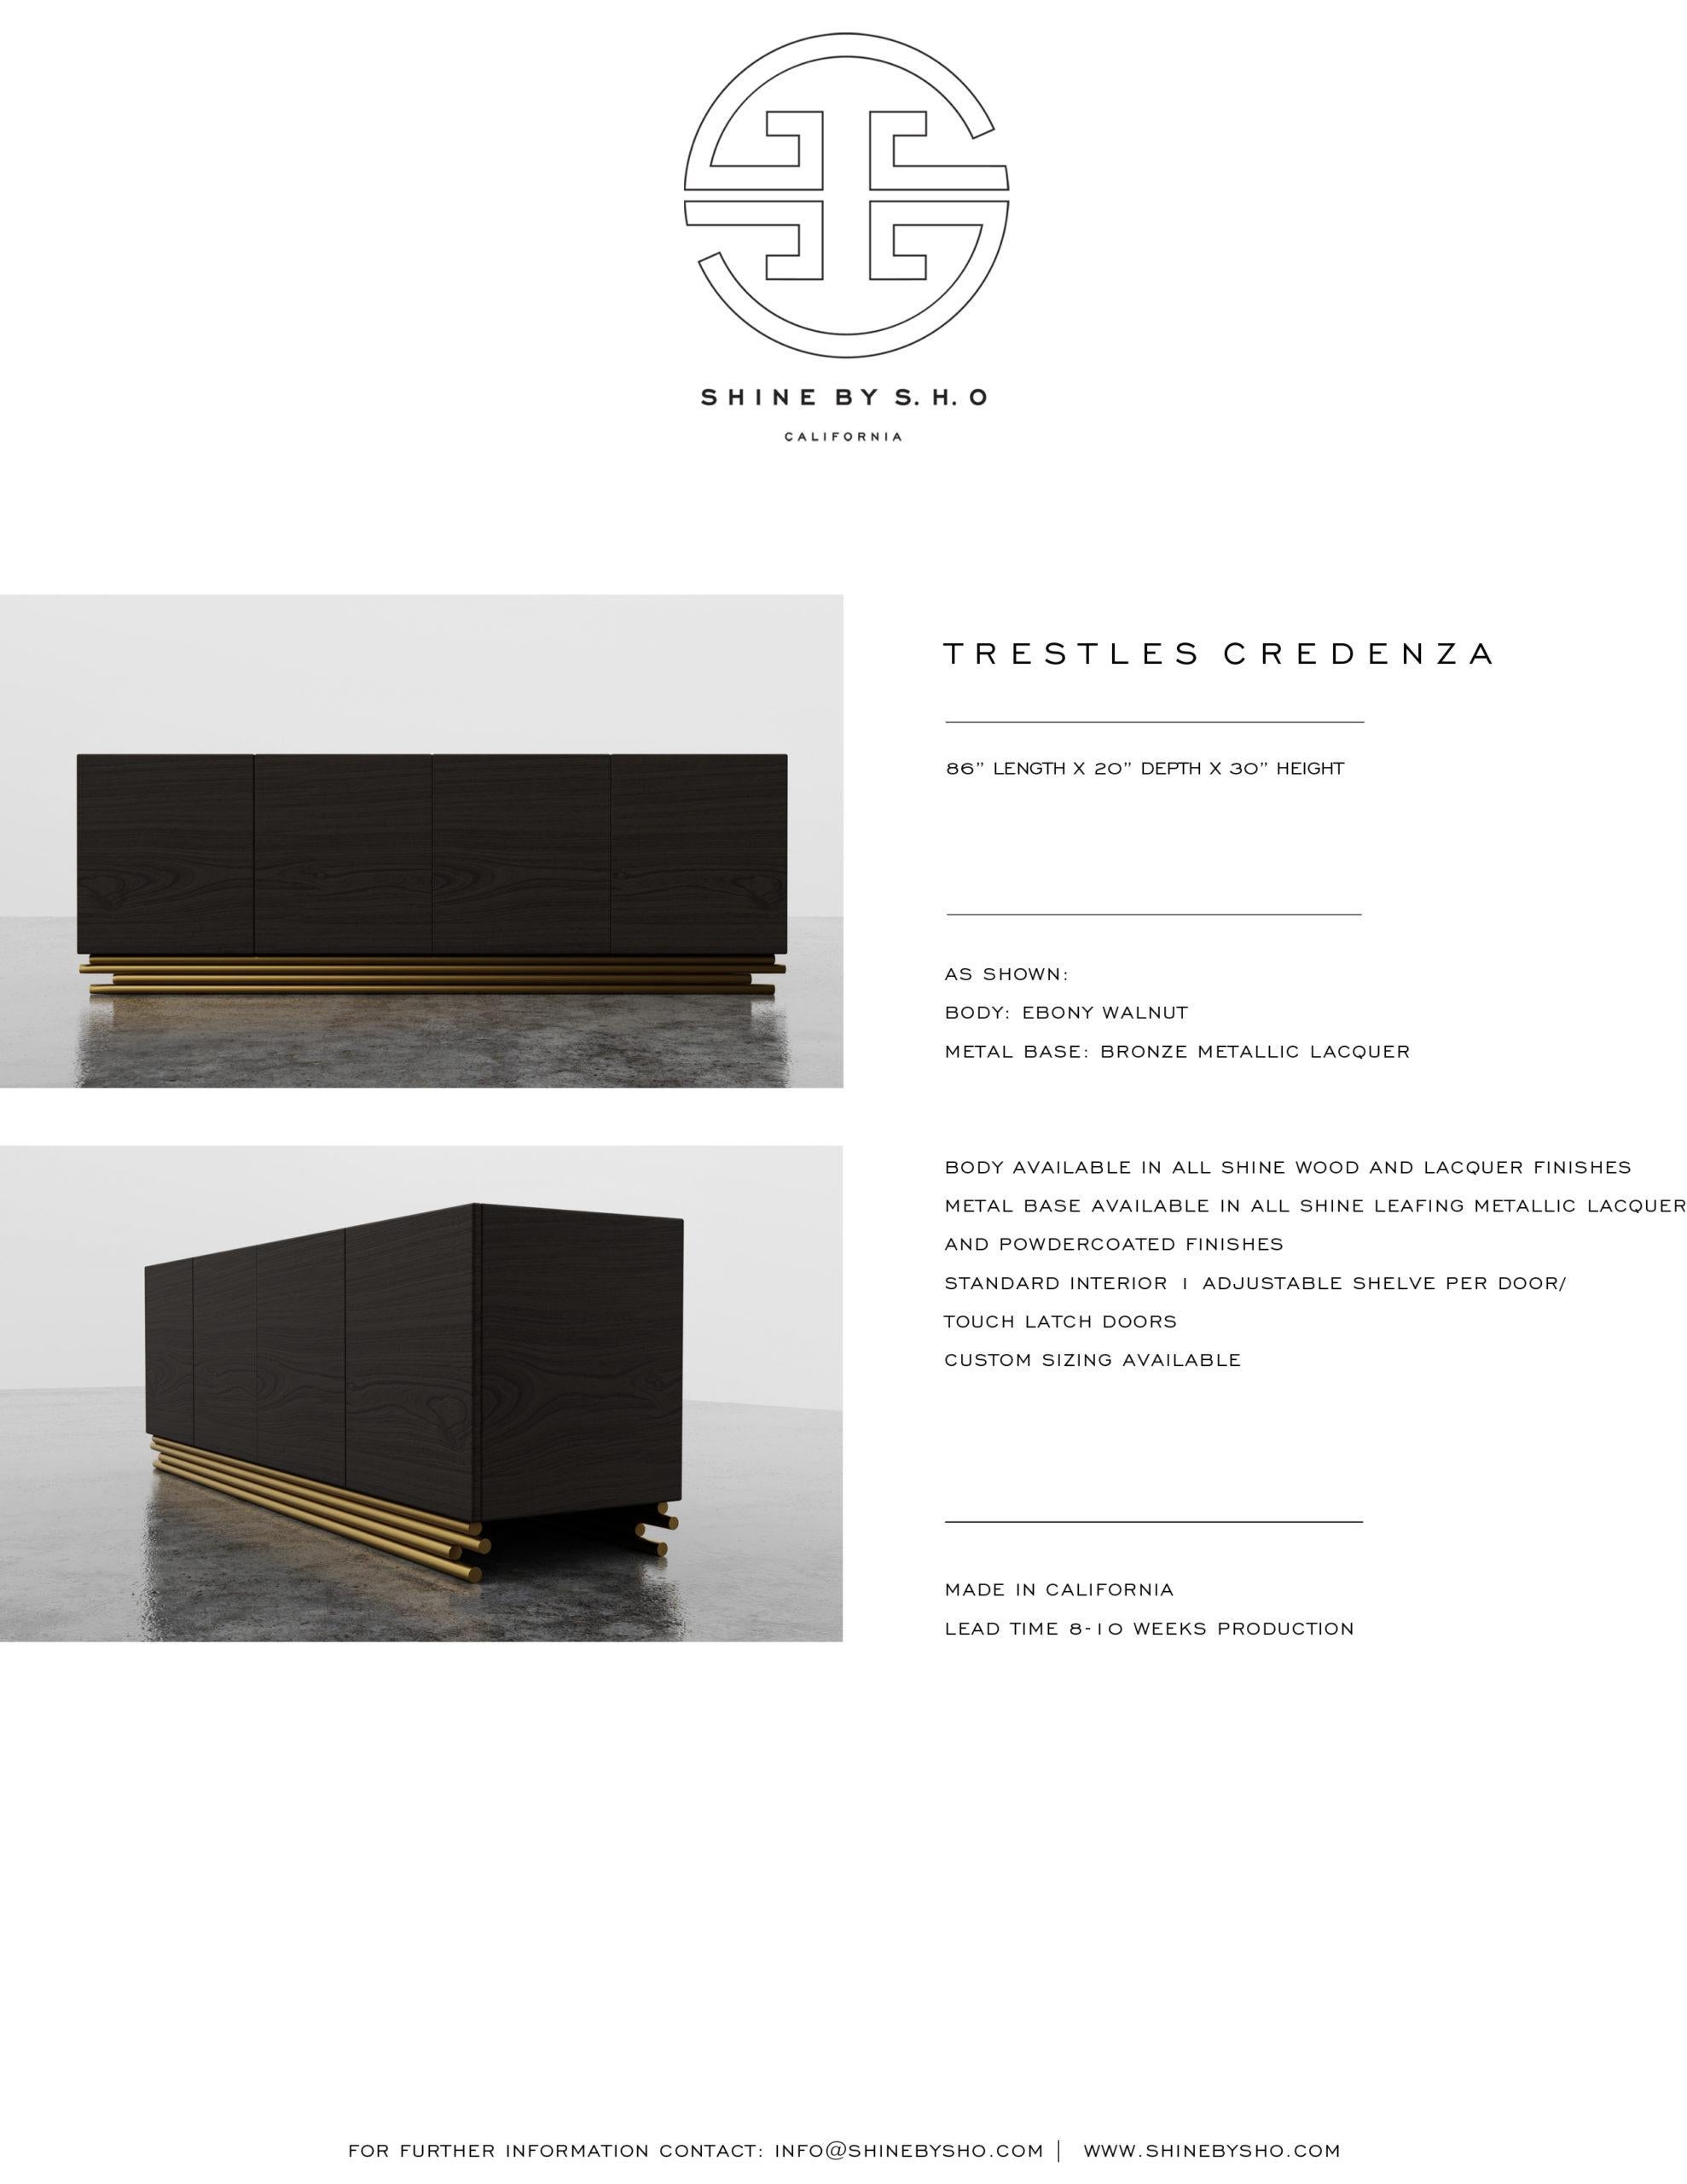 TRESTLES CREDENZA - Modern Ebony Walnut Cabinet with Metallic Lacquer Metal Base In New Condition For Sale In Laguna Niguel, CA